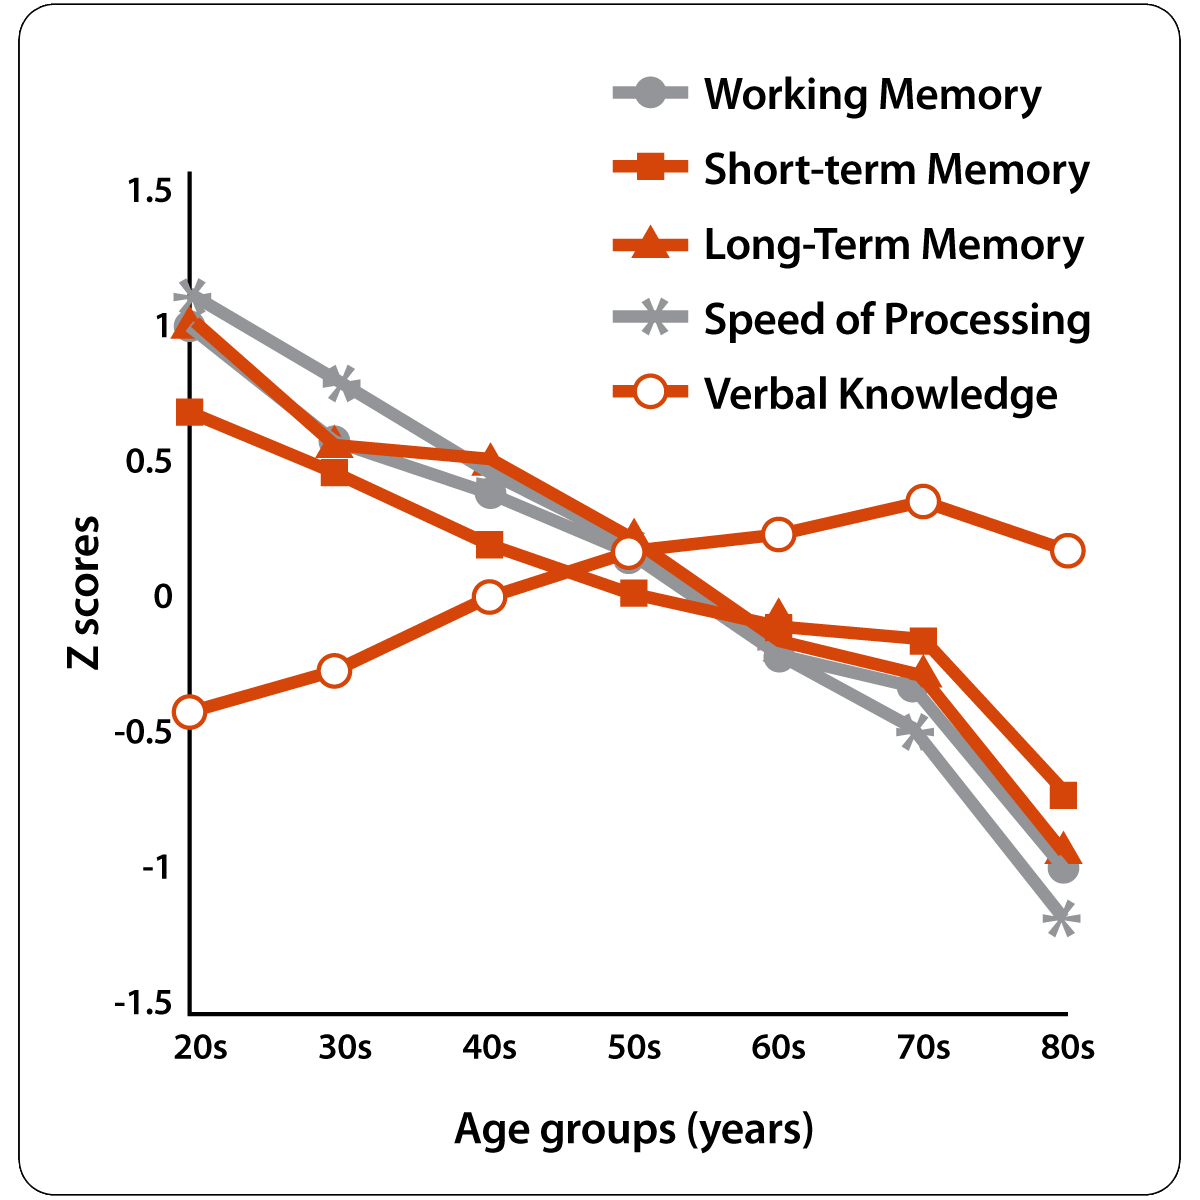 This graph addresses the complexity of IQ and measures how working memory, short-term memory, long-term memory, speed of processing, and verbal knowledge change over time.  The general trend is that working memory, short-term memory, long-term memory, and speed of processing do decline with age.  Verbal knowledge is the only aspect that increases gradually until the 70s when it then shows a slight decline into the 80s.